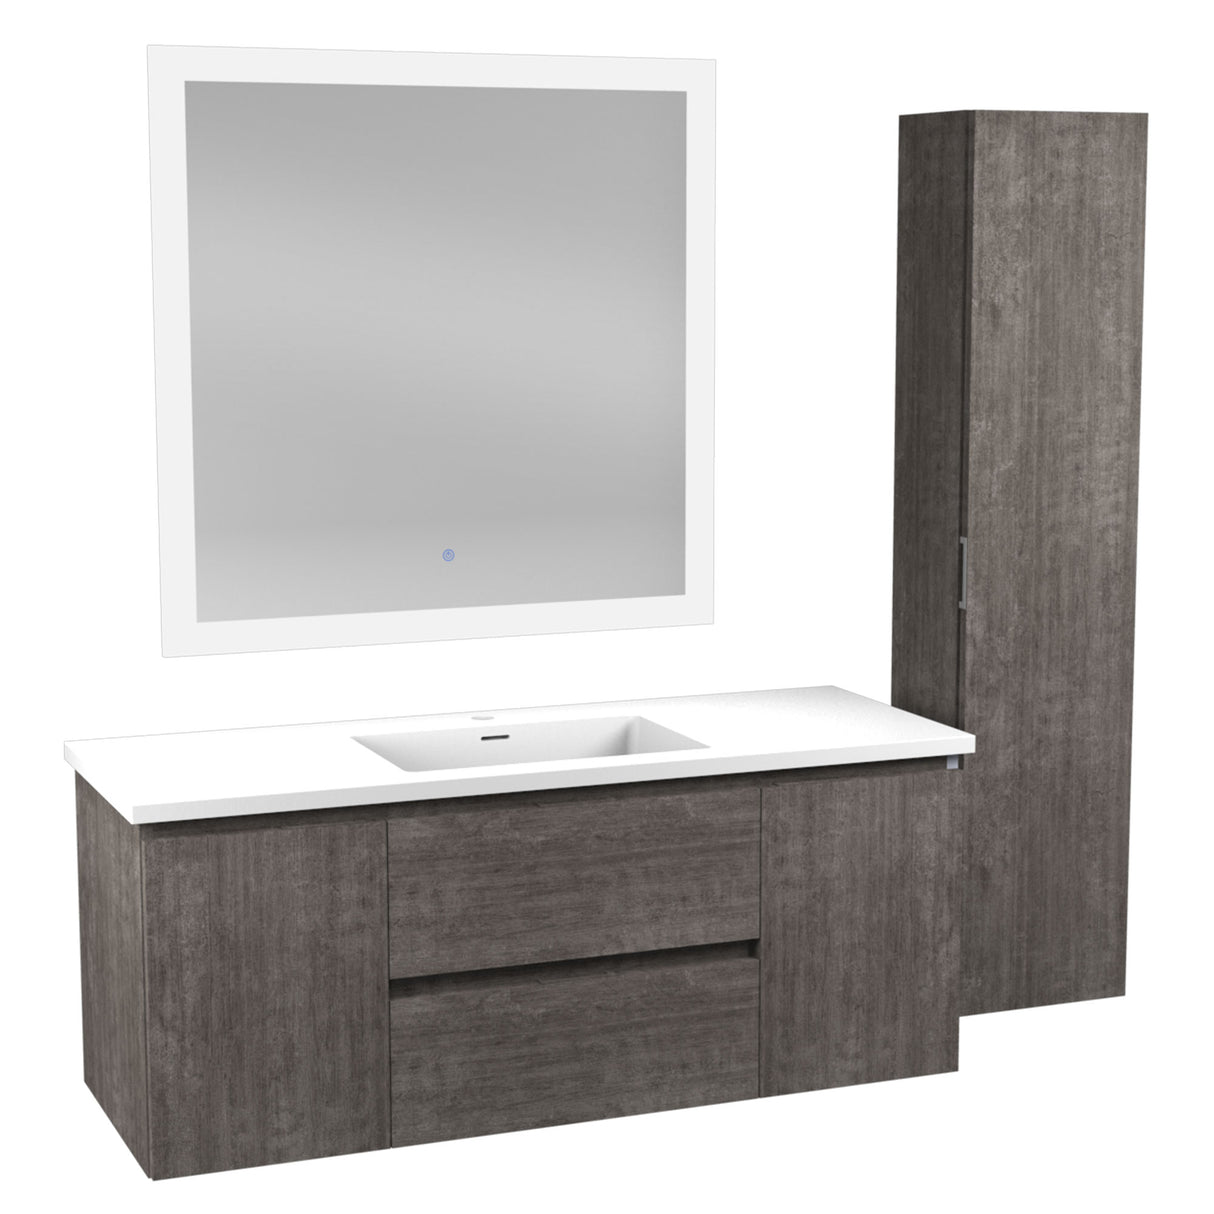 ANZZI VT-MR4SCCT48-GY 48 in. W x 20 in. H x 18 in. D Bath Vanity Set in Rich Gray with Vanity Top in White with White Basin and Mirror